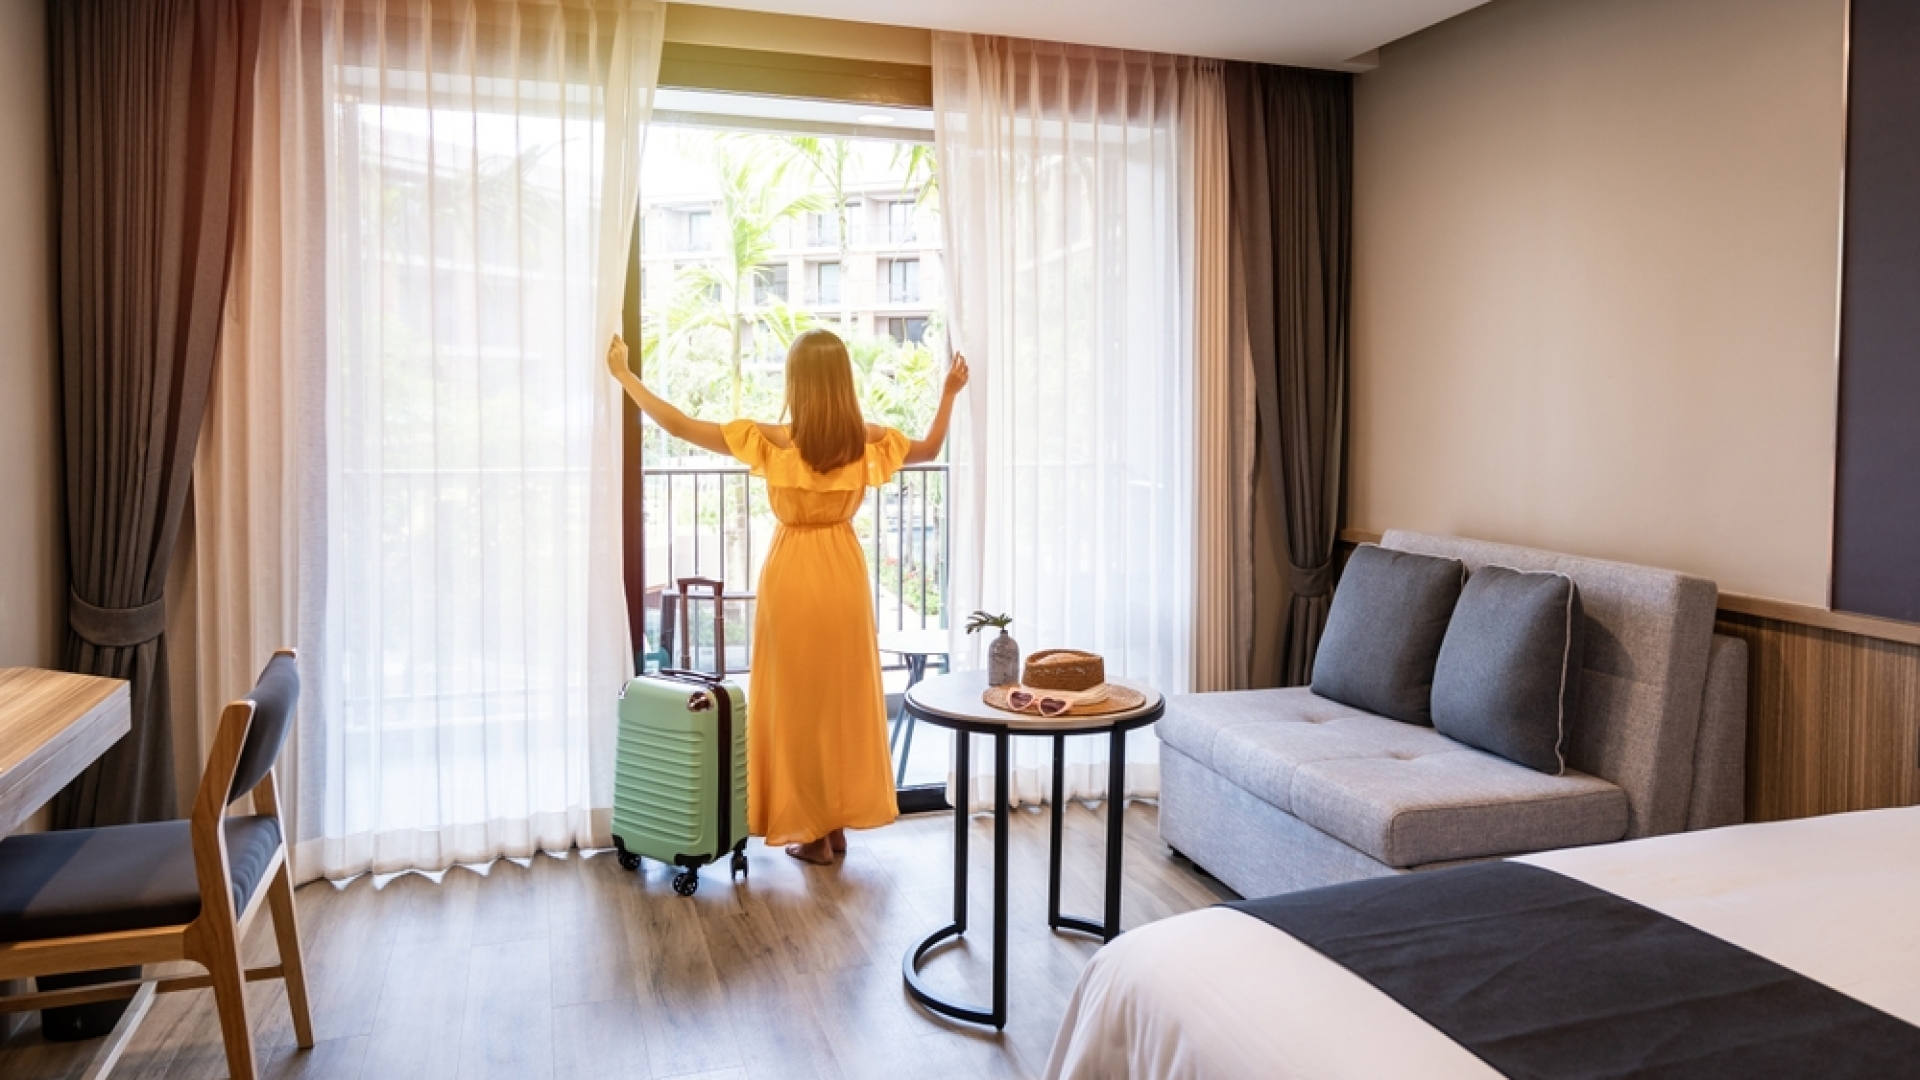 How to Book an Airbnb - NerdWallet